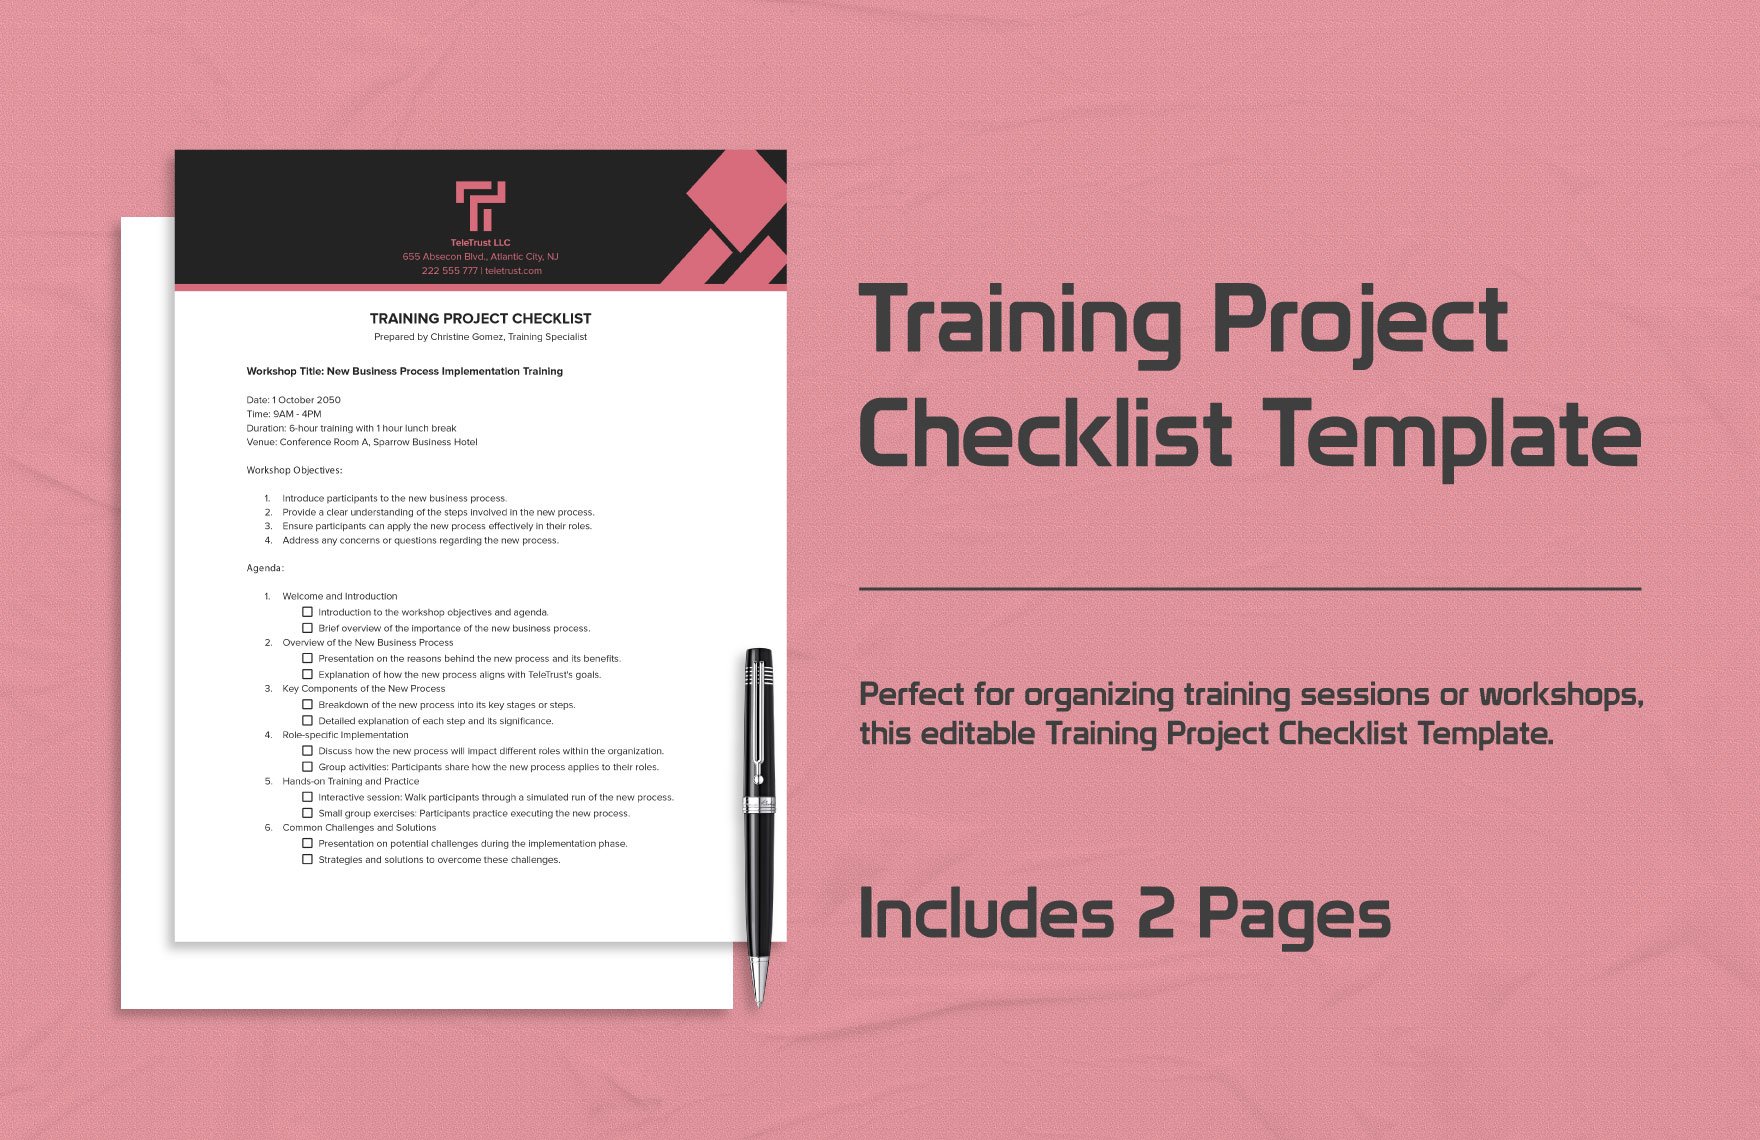 Training Project Checklist Template